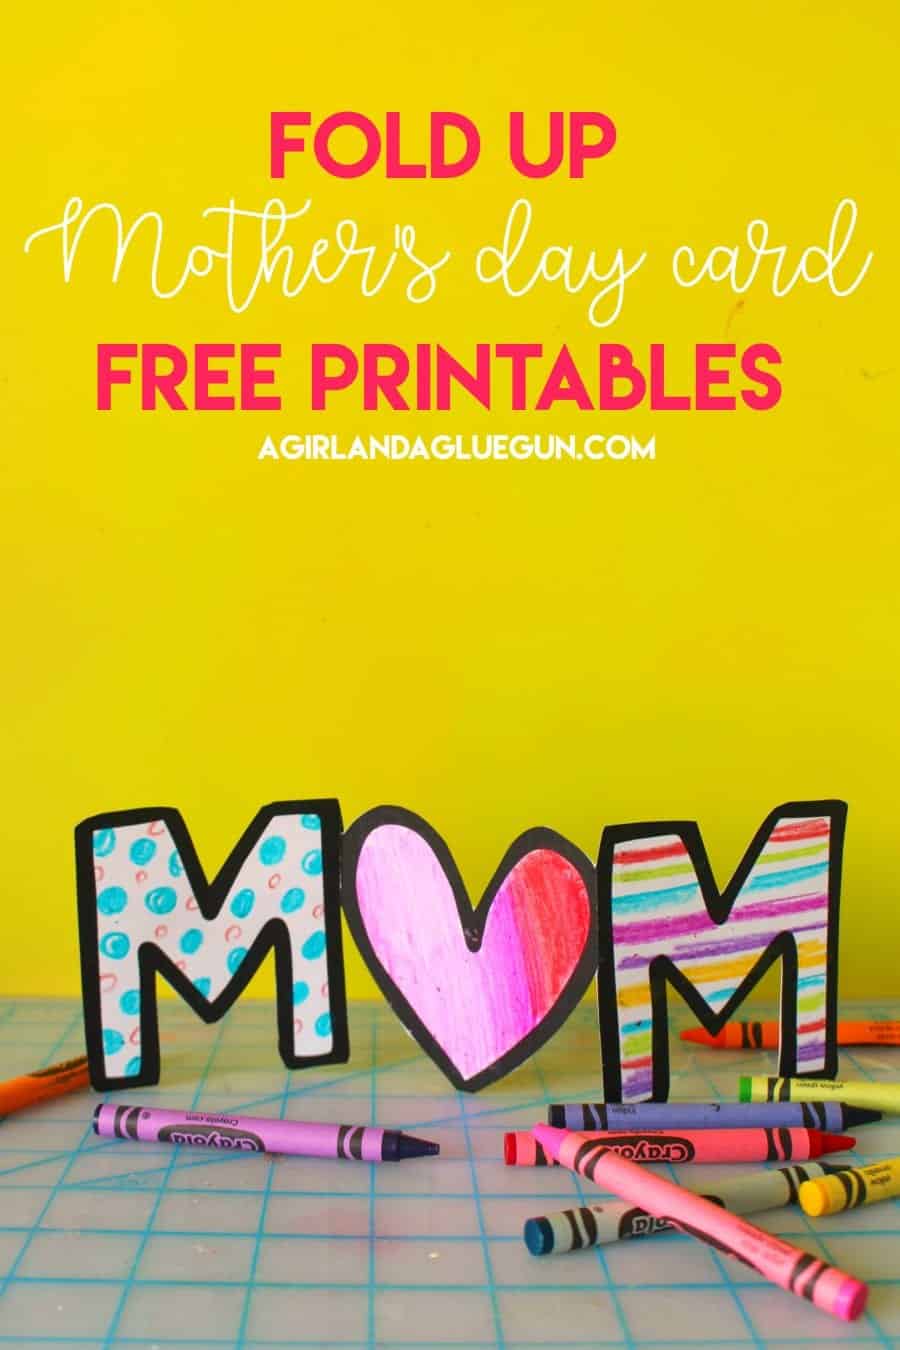 mother-s-day-card-for-kids-to-color-a-girl-and-a-glue-gun